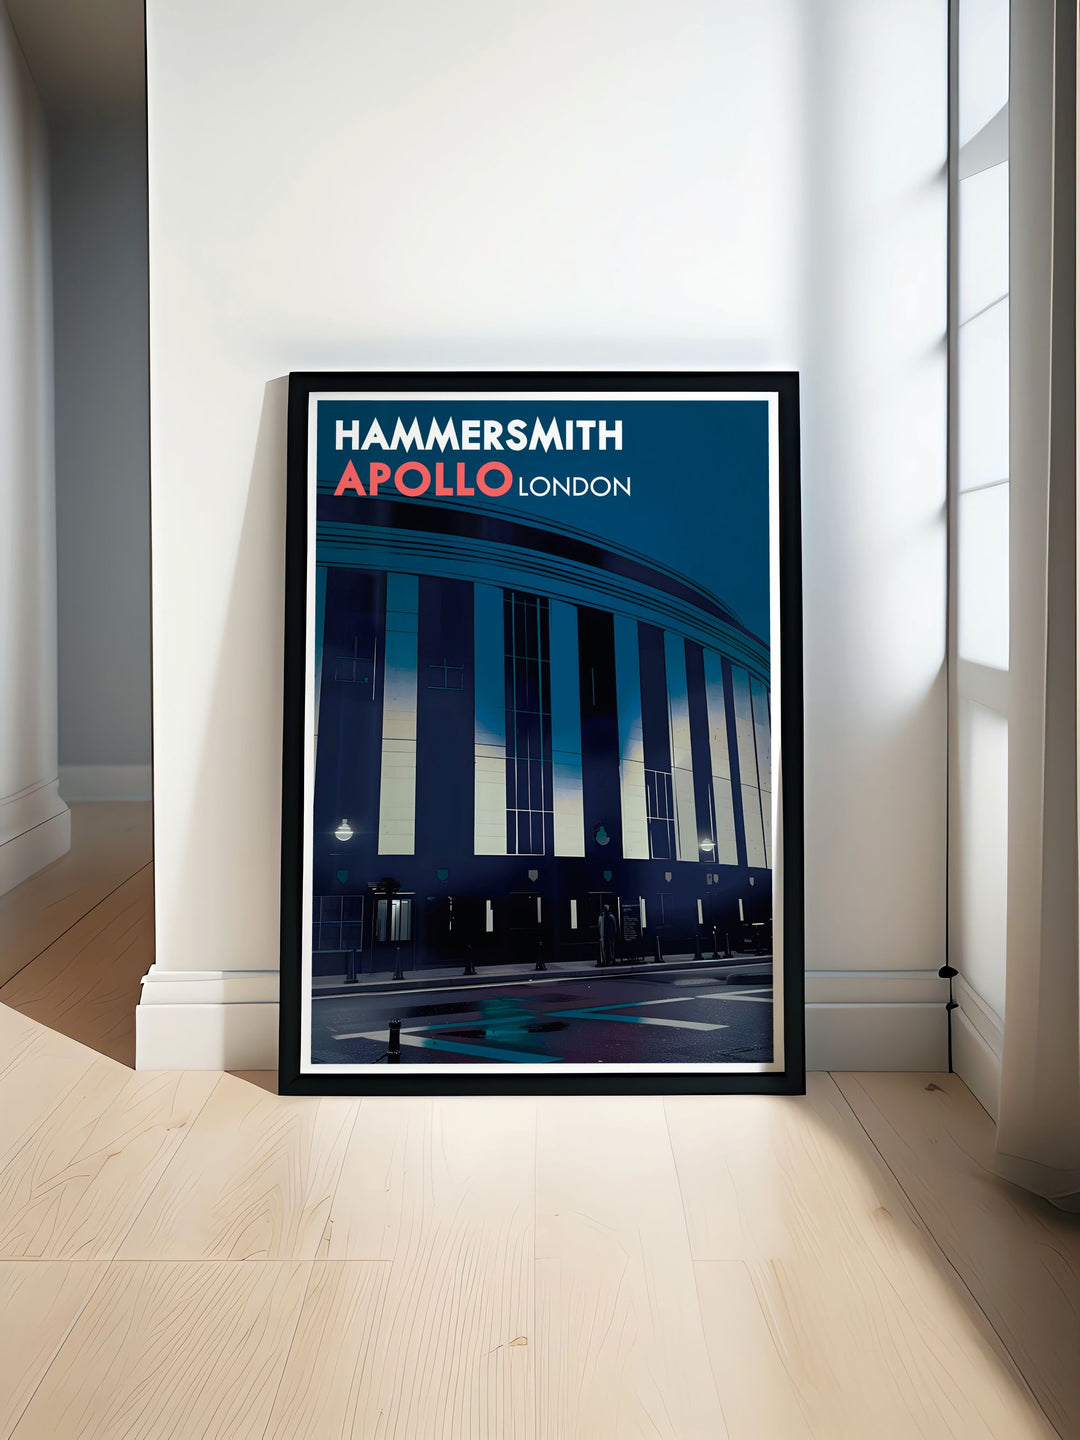 The travel poster of Hammersmith Apollo captures its iconic Art Deco facade, highlighting the historic music venues architectural beauty and vibrant atmosphere in London.